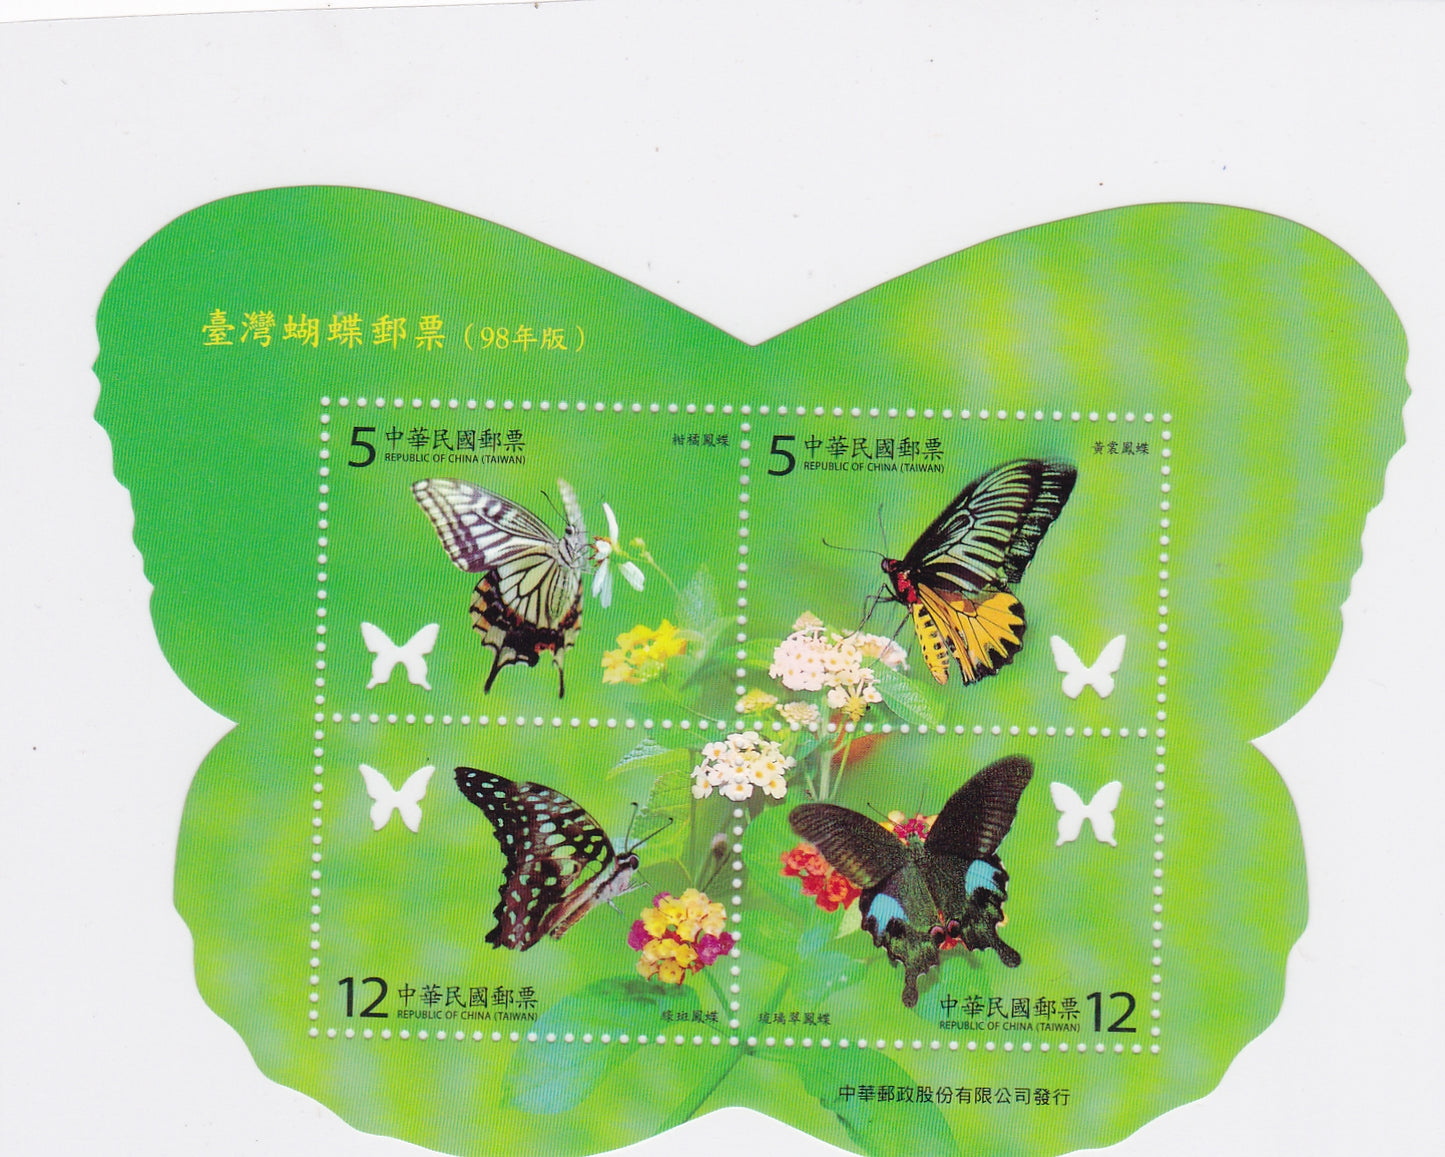 Taiwan butterflies shape odd cutting ms with Die cut in shape of butterfly in all stamps